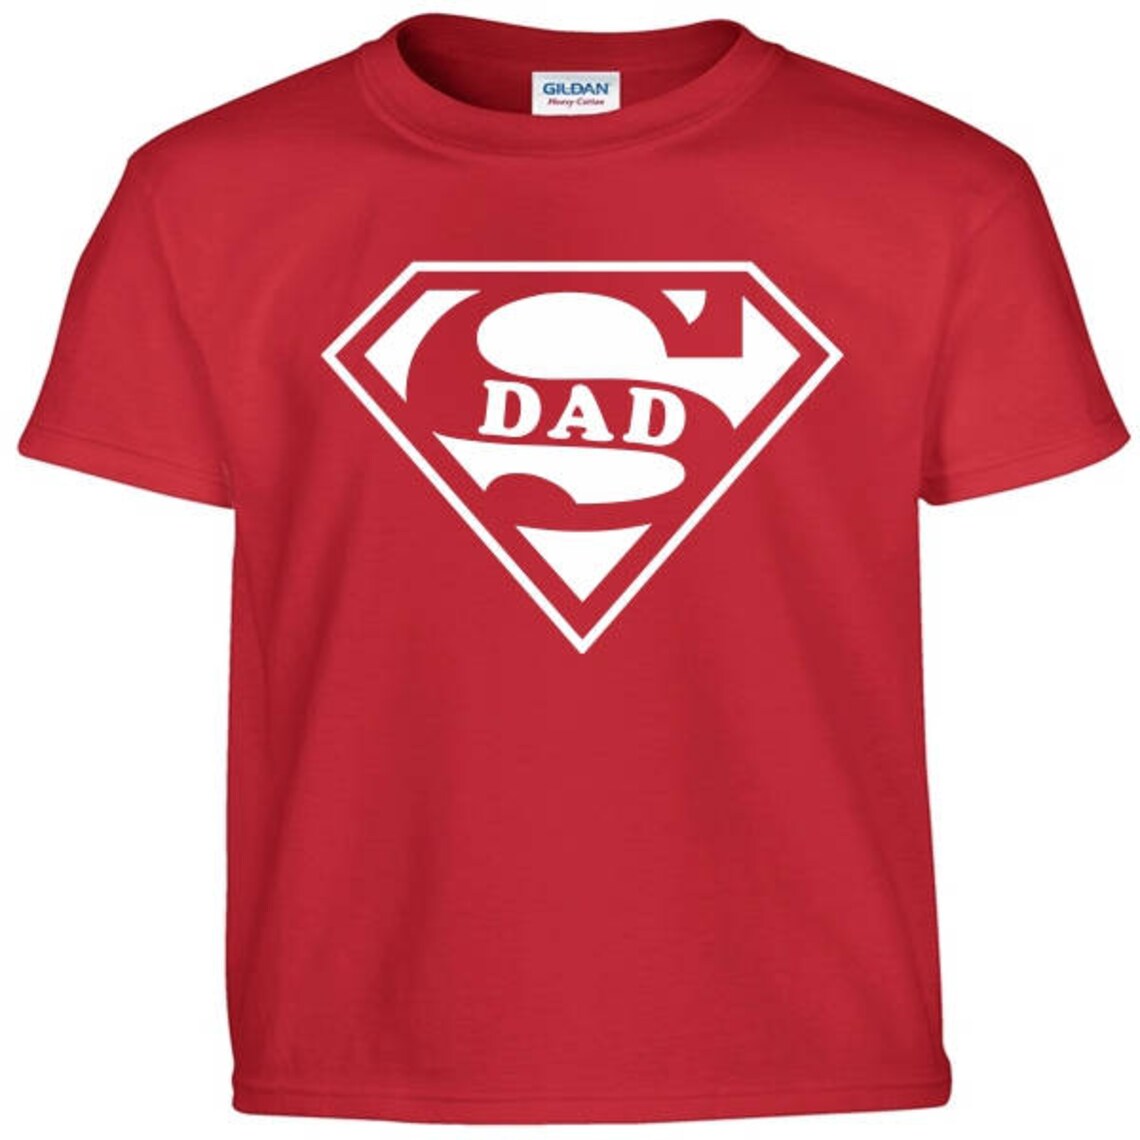 SUPER DAD Funny Superhero Fathers Day Gift Birthday Christmas | Etsy